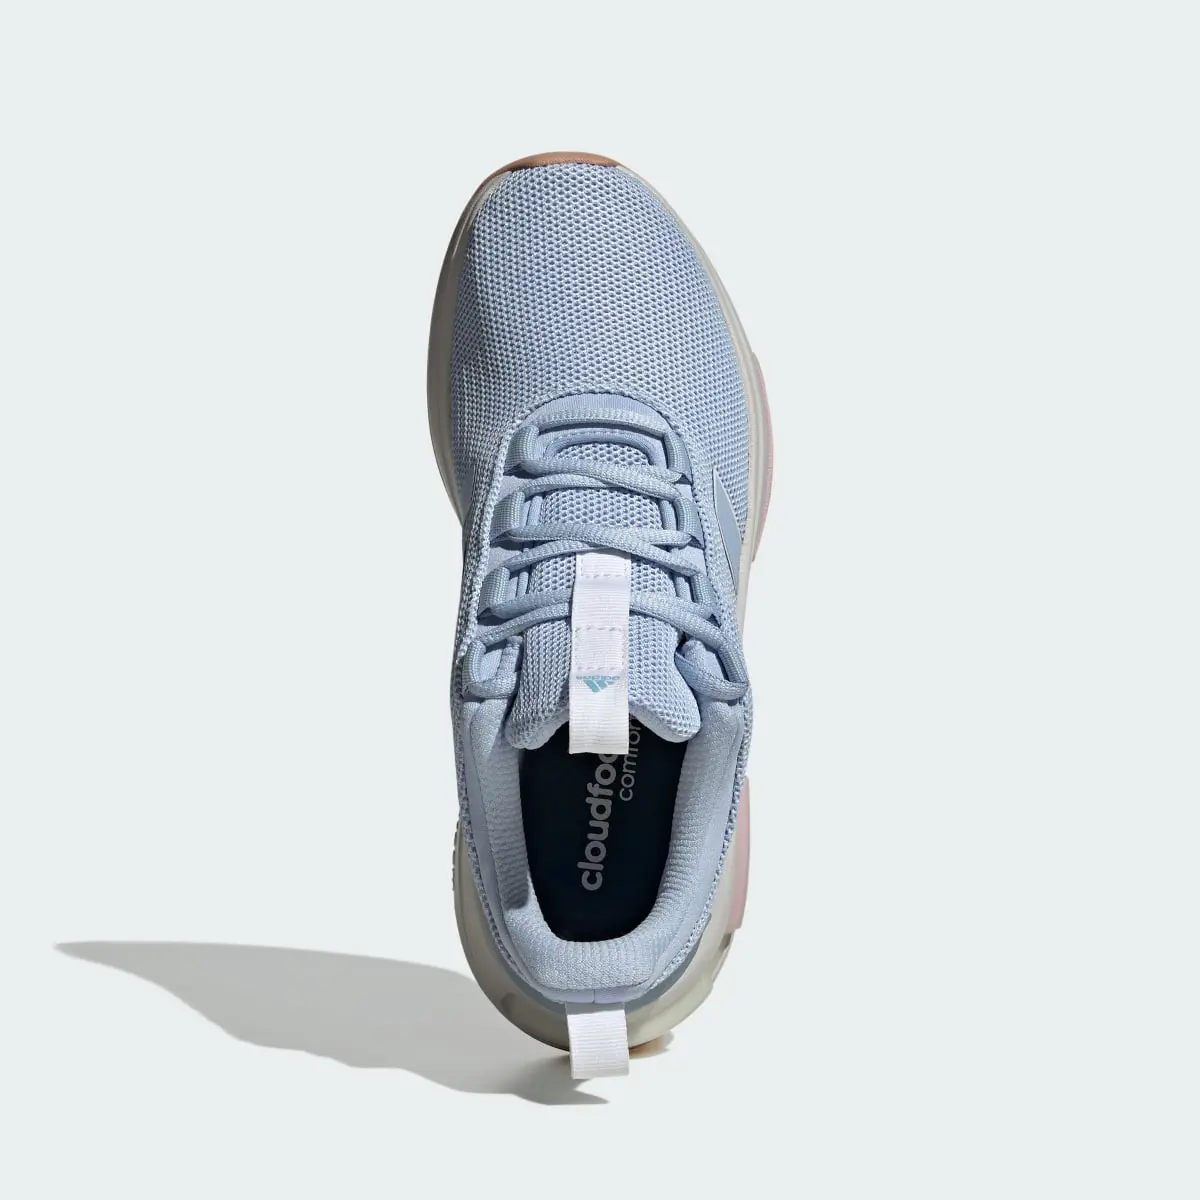 Adidas Racer TR23 Shoes. 3